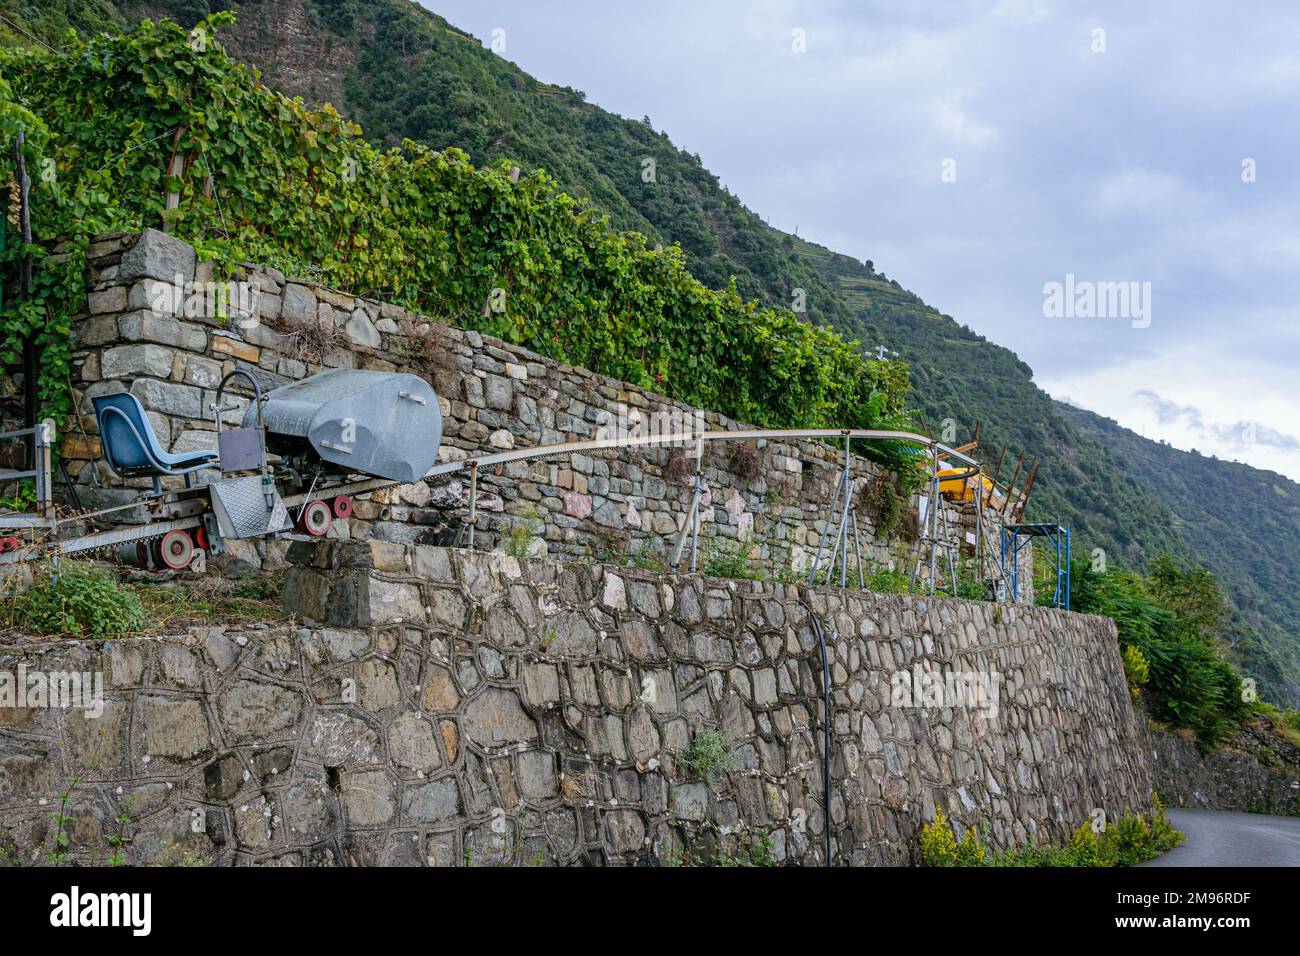 Small railway used to tend and harvest grapes on the steep slopes of above Corniglio, a small cliff-top village in the Cinque Terra, Italy Stock Photo